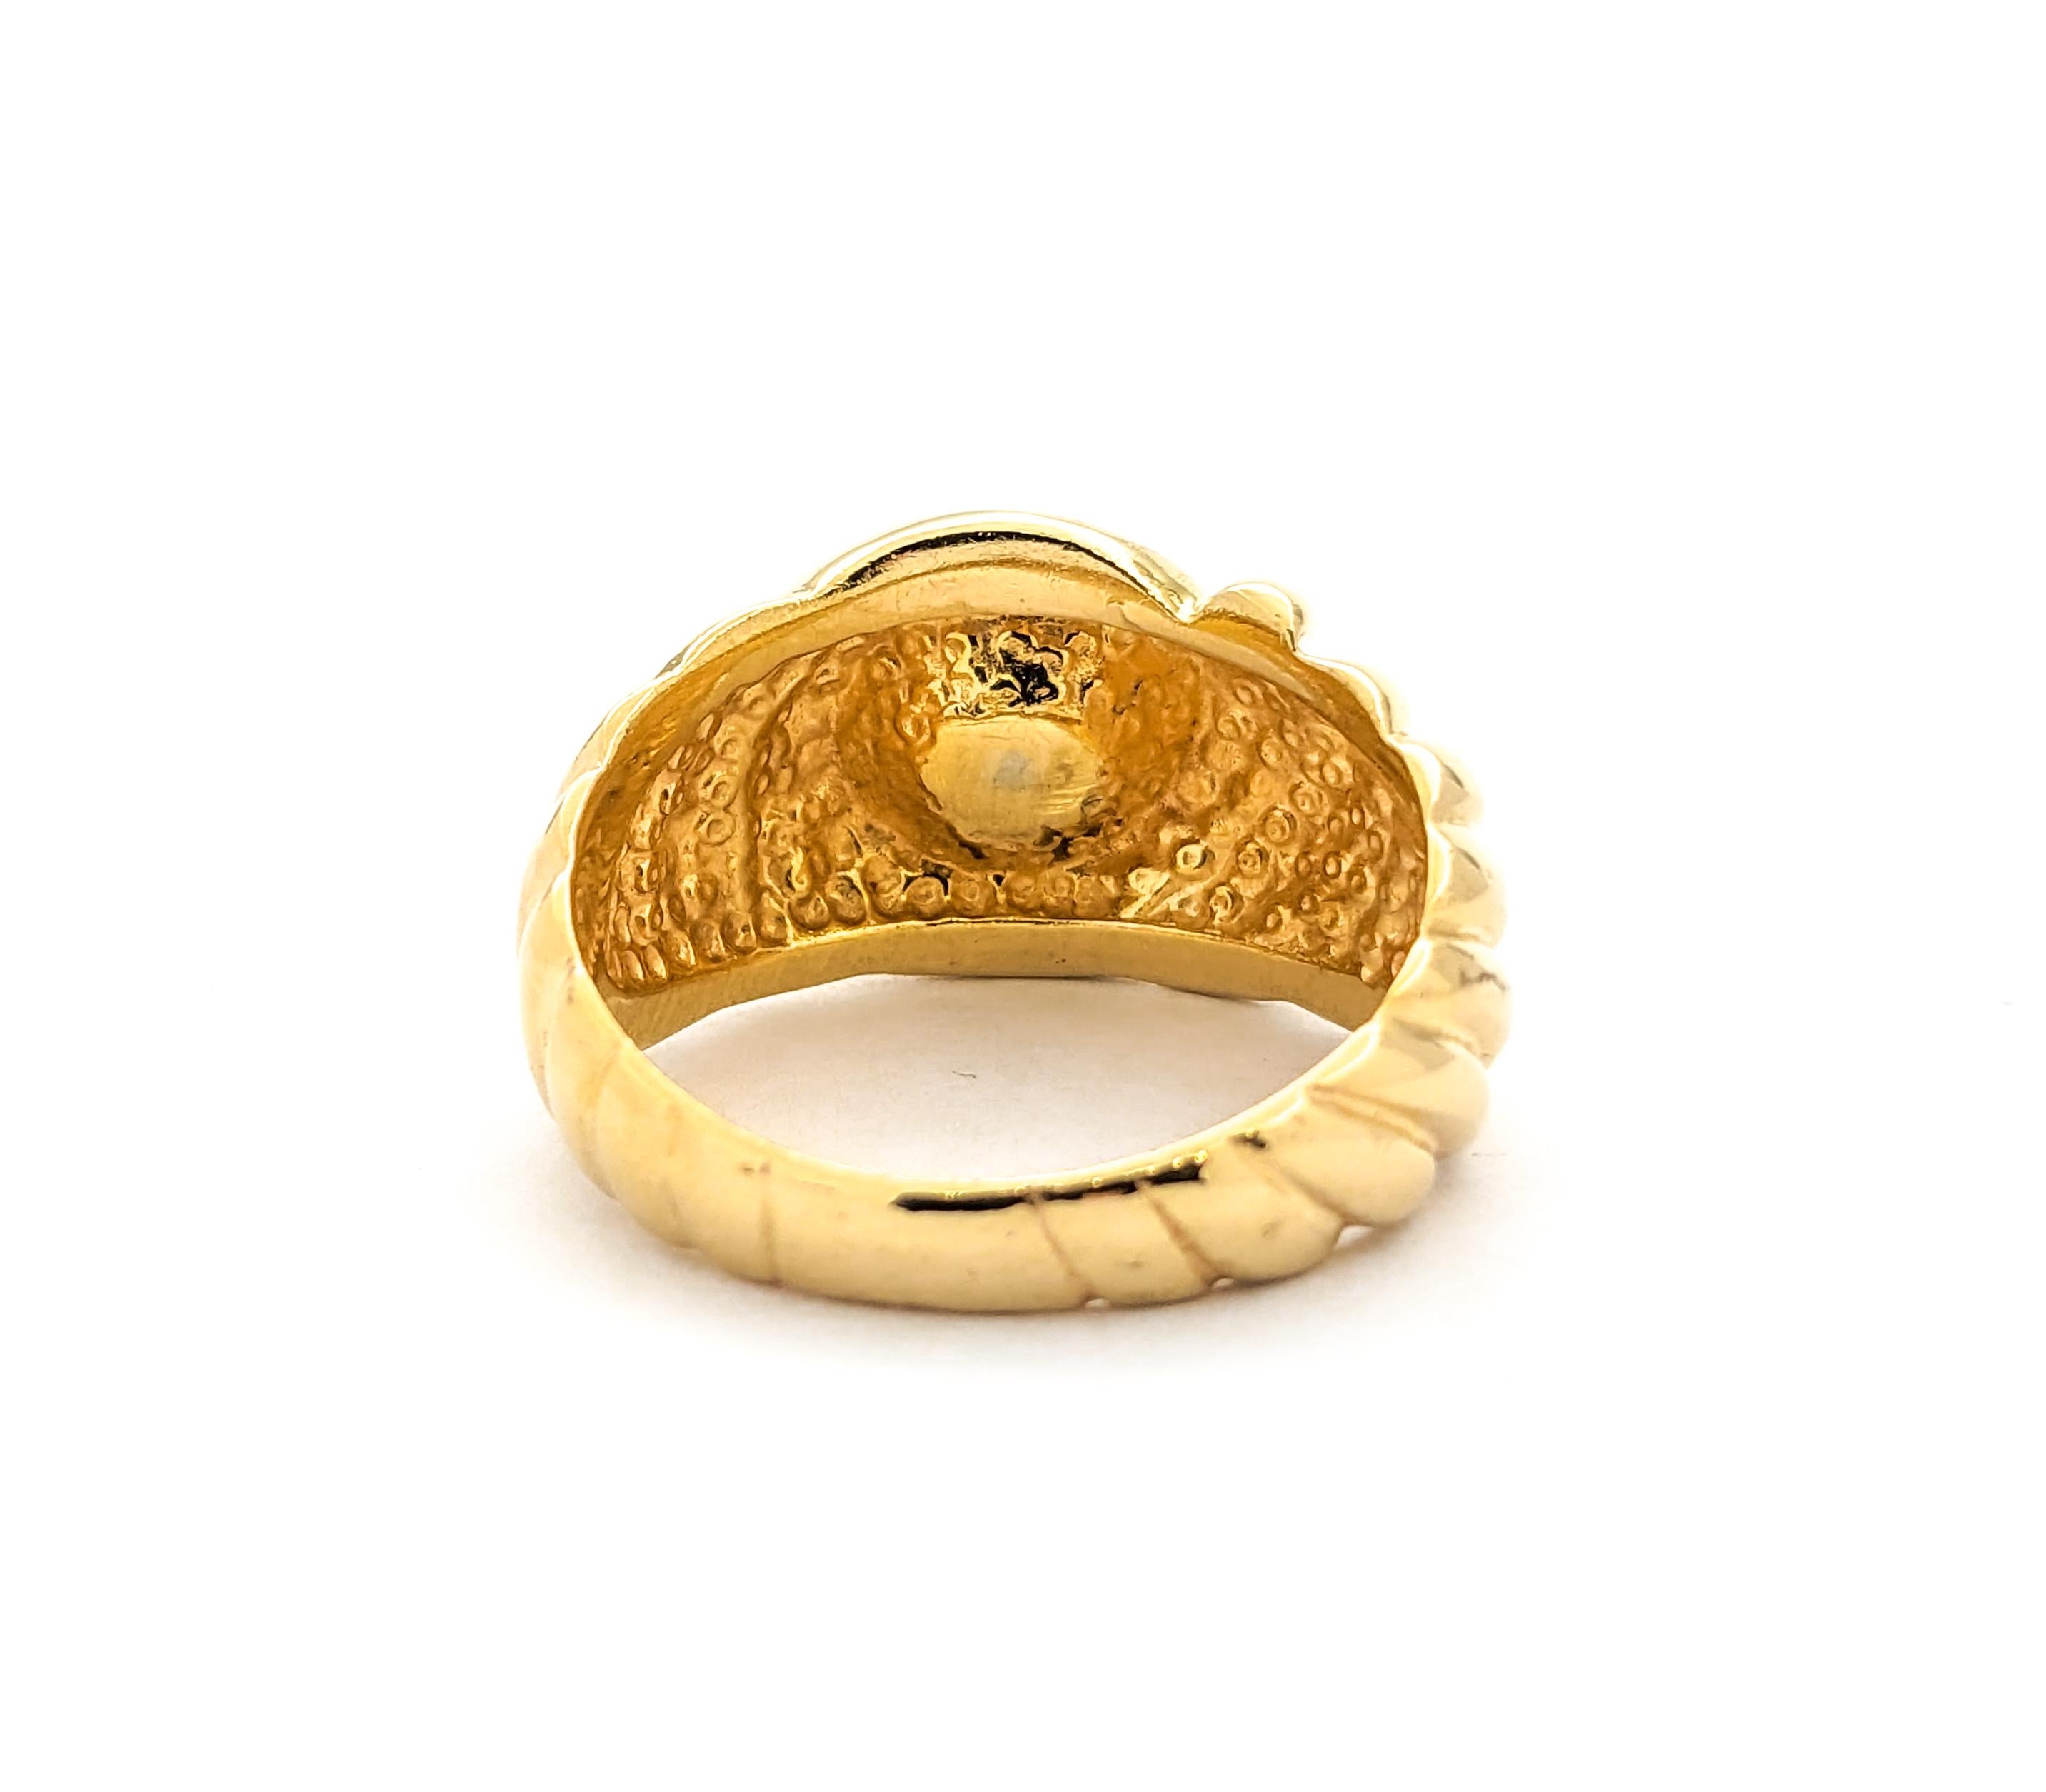 5ct Diamond Swirl Design Ring In Yellow Gold For Sale 4